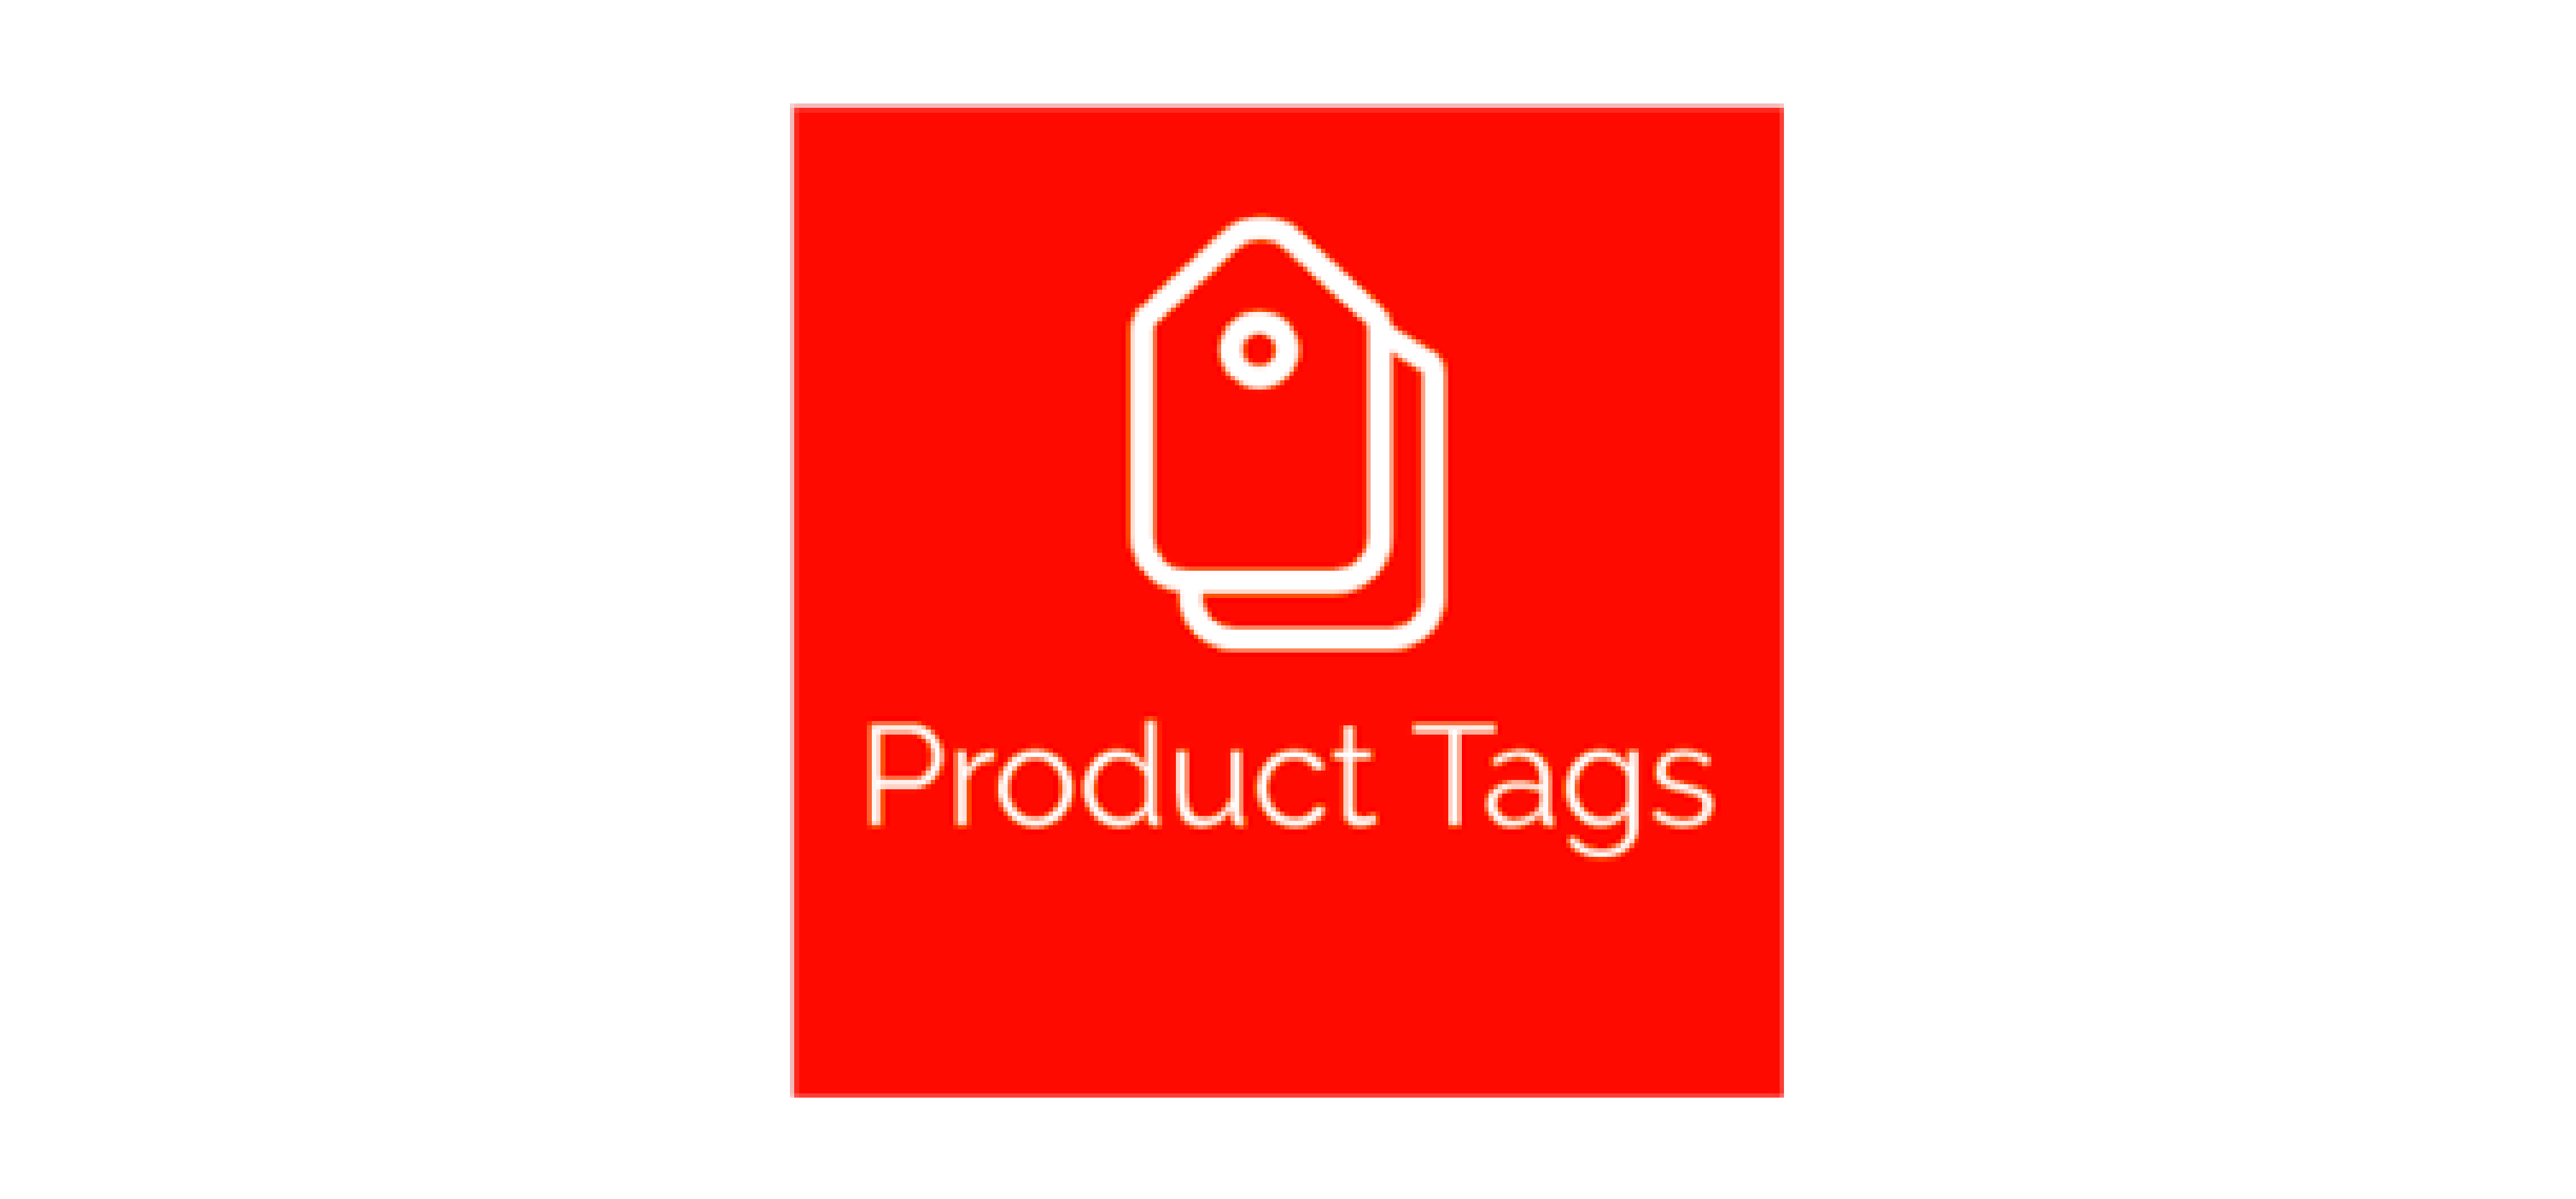 Magepow product tag extension- How to Add Product Tags in Magento